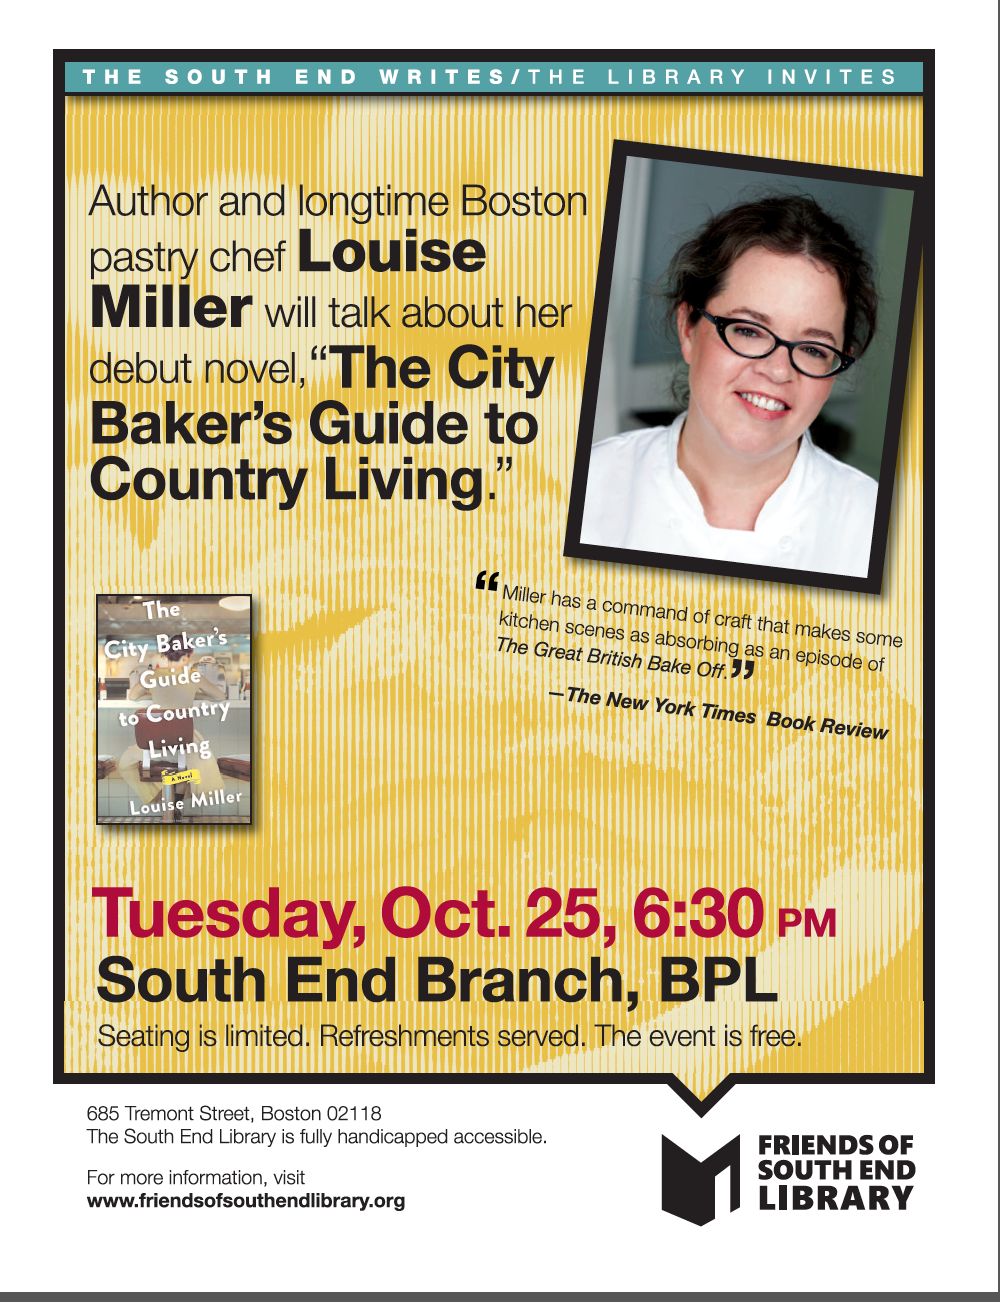 Louise Miller, Pastry Chef and Author, Will Present Her Debut